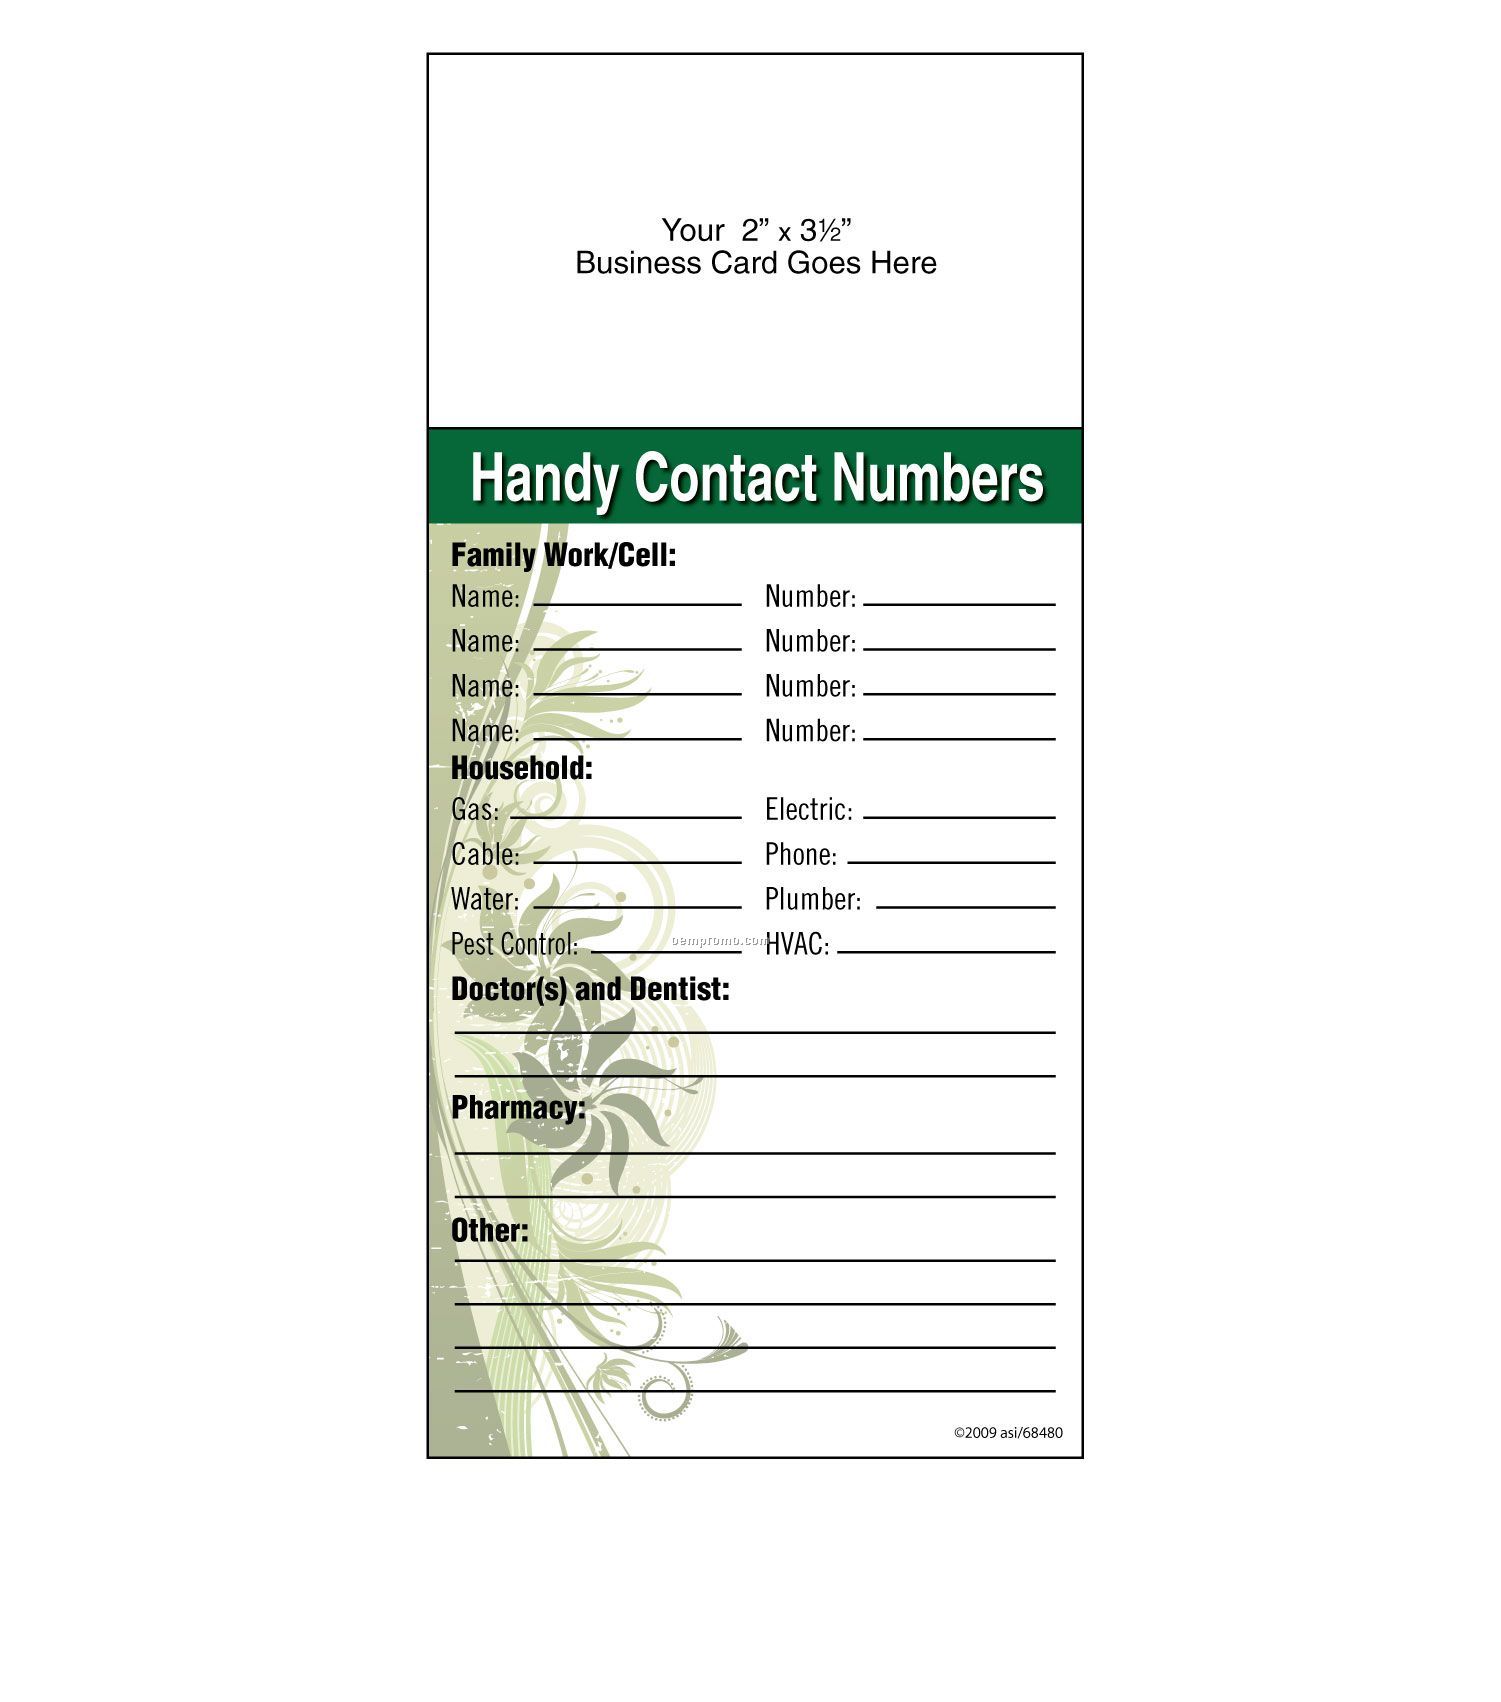 Self-adhesive Add-on Magnet + Info Card "Handy Contact Numbers"